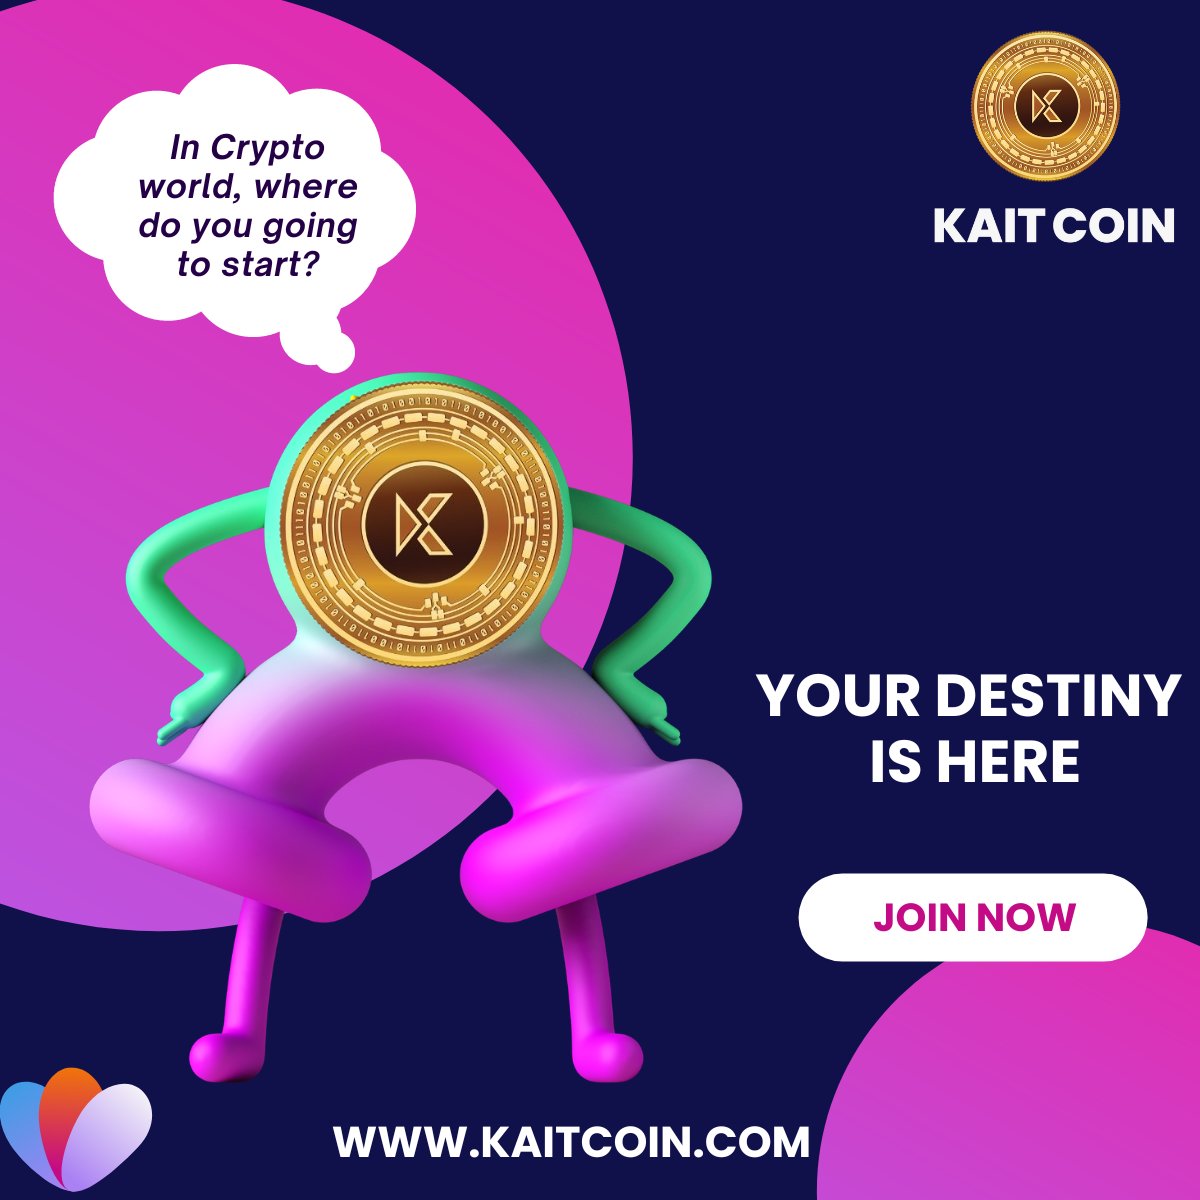 Don't miss the next big thing!    #KAITCOIN is poised to revolutionize the crypto space.  Be an early adopter and join the KAIT fam! 

For more details and Updates.
Website : kaitcrypto.com

#kait #kaitcoin #crypto #cryptomoney #cryptocurrency #bitcoin #promo #buycrypto